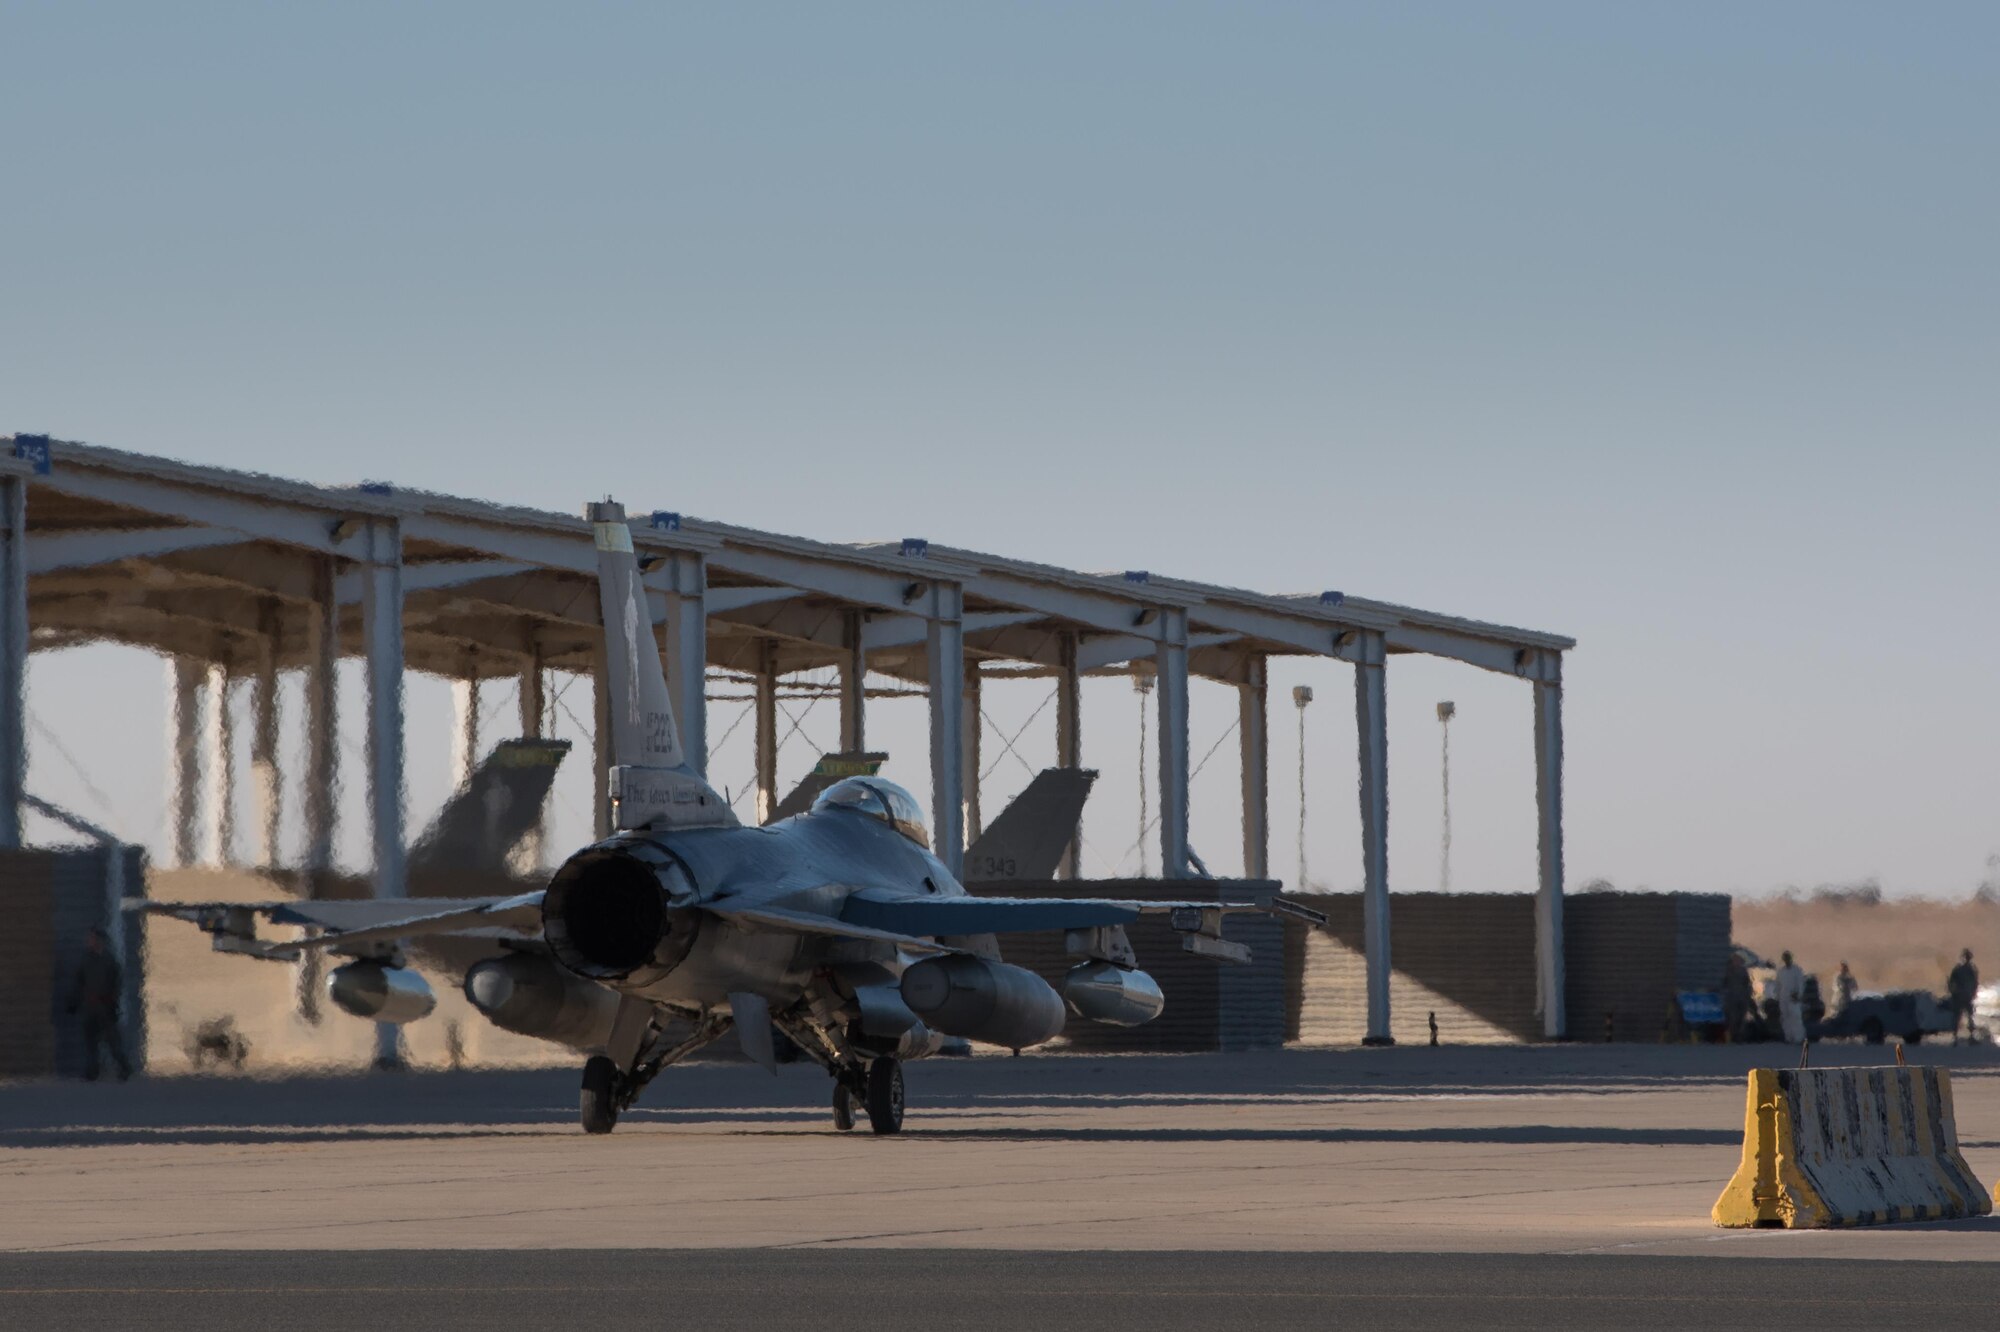 An F-16 Fighting Falcon assigned to the 134th Expeditionary Fighter Squadron taxis onto the ramp at the 407th Air Expeditionary Group, Southwest Asia, Dec. 10, 2016. The F-16 squadron is comprised of Airmen from the 158th Fighter Wing of the Vermont Air National Guard. (U.S. Air Force photo by Master Sgt. Benjamin Wilson)